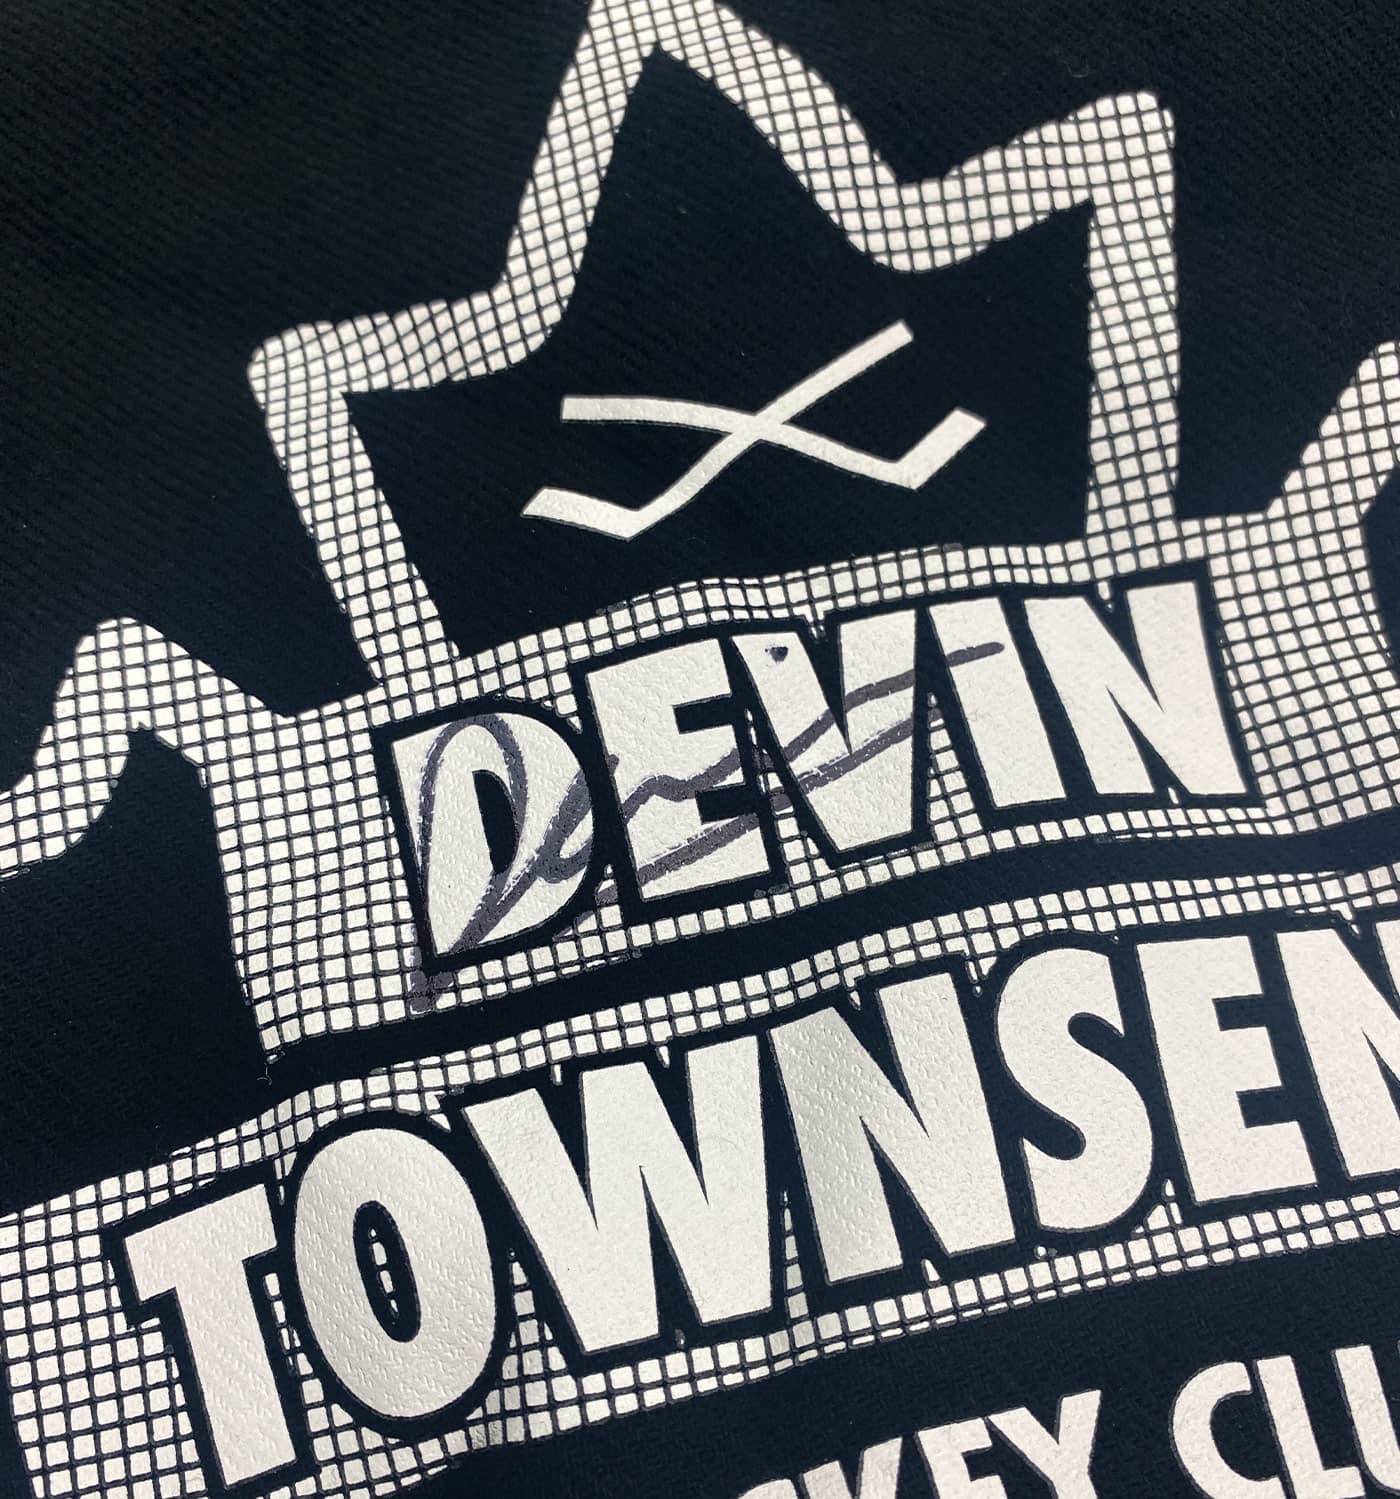 DEVIN TOWNSEND 'LEAF HOCKEY CLUB' limited edition, signed hockey flannel in solid black close up of back view